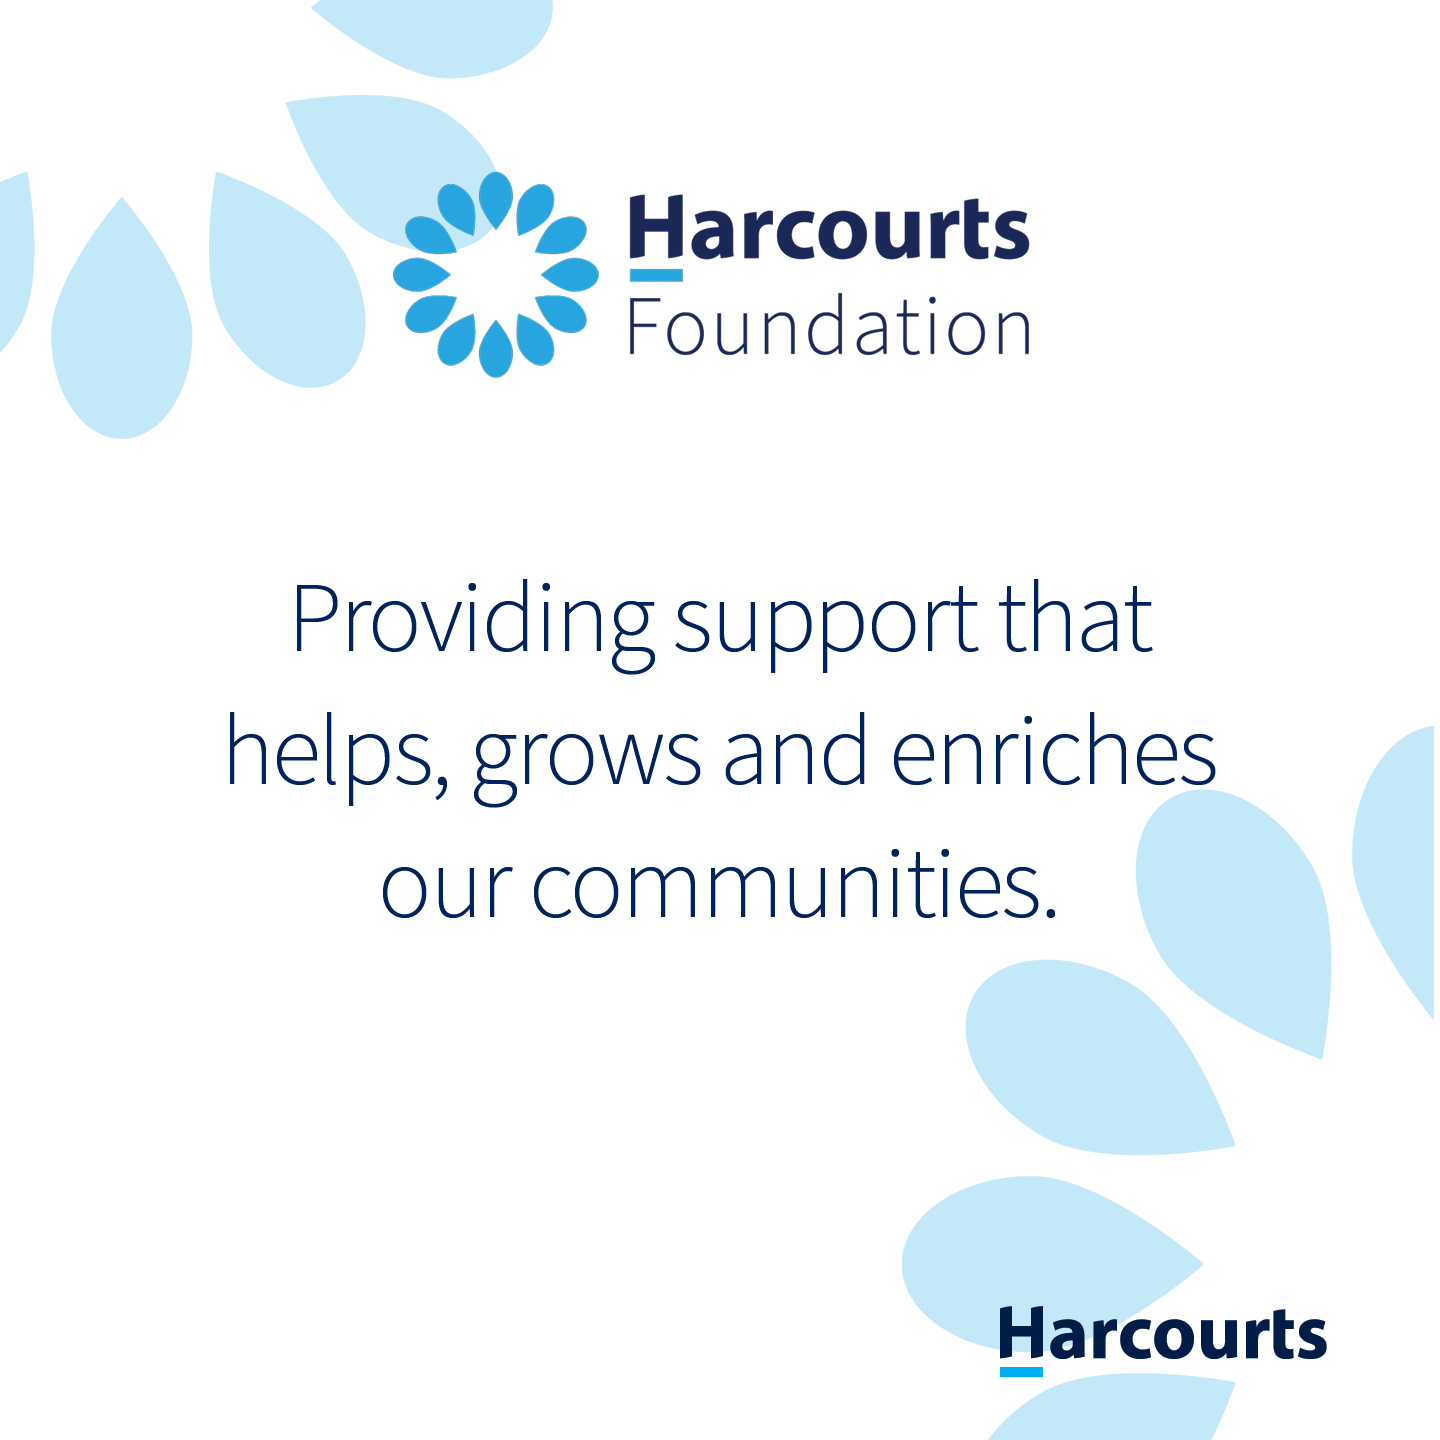 Fact: Harcourts Foudnation provides support that helps, grows, and enriches our communities.